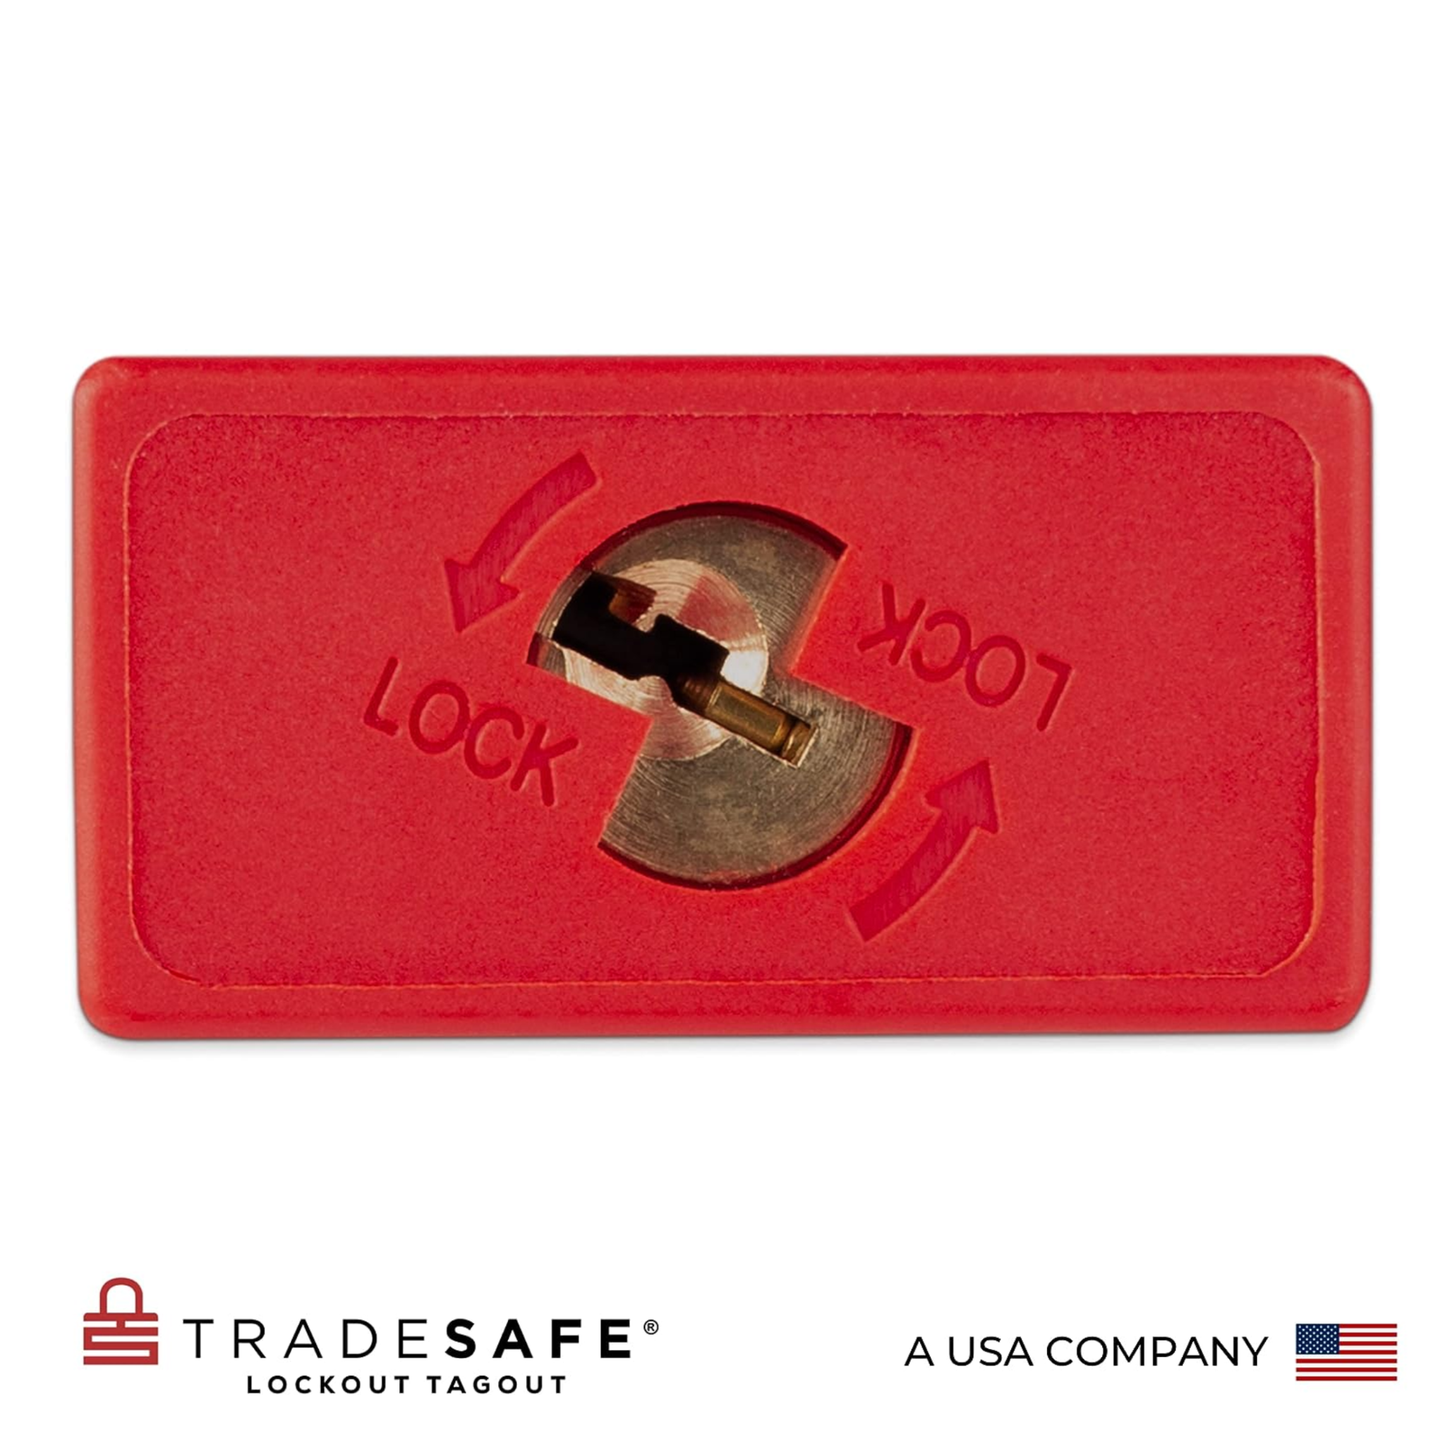 close-up view of the bottom part of a red loto padlock